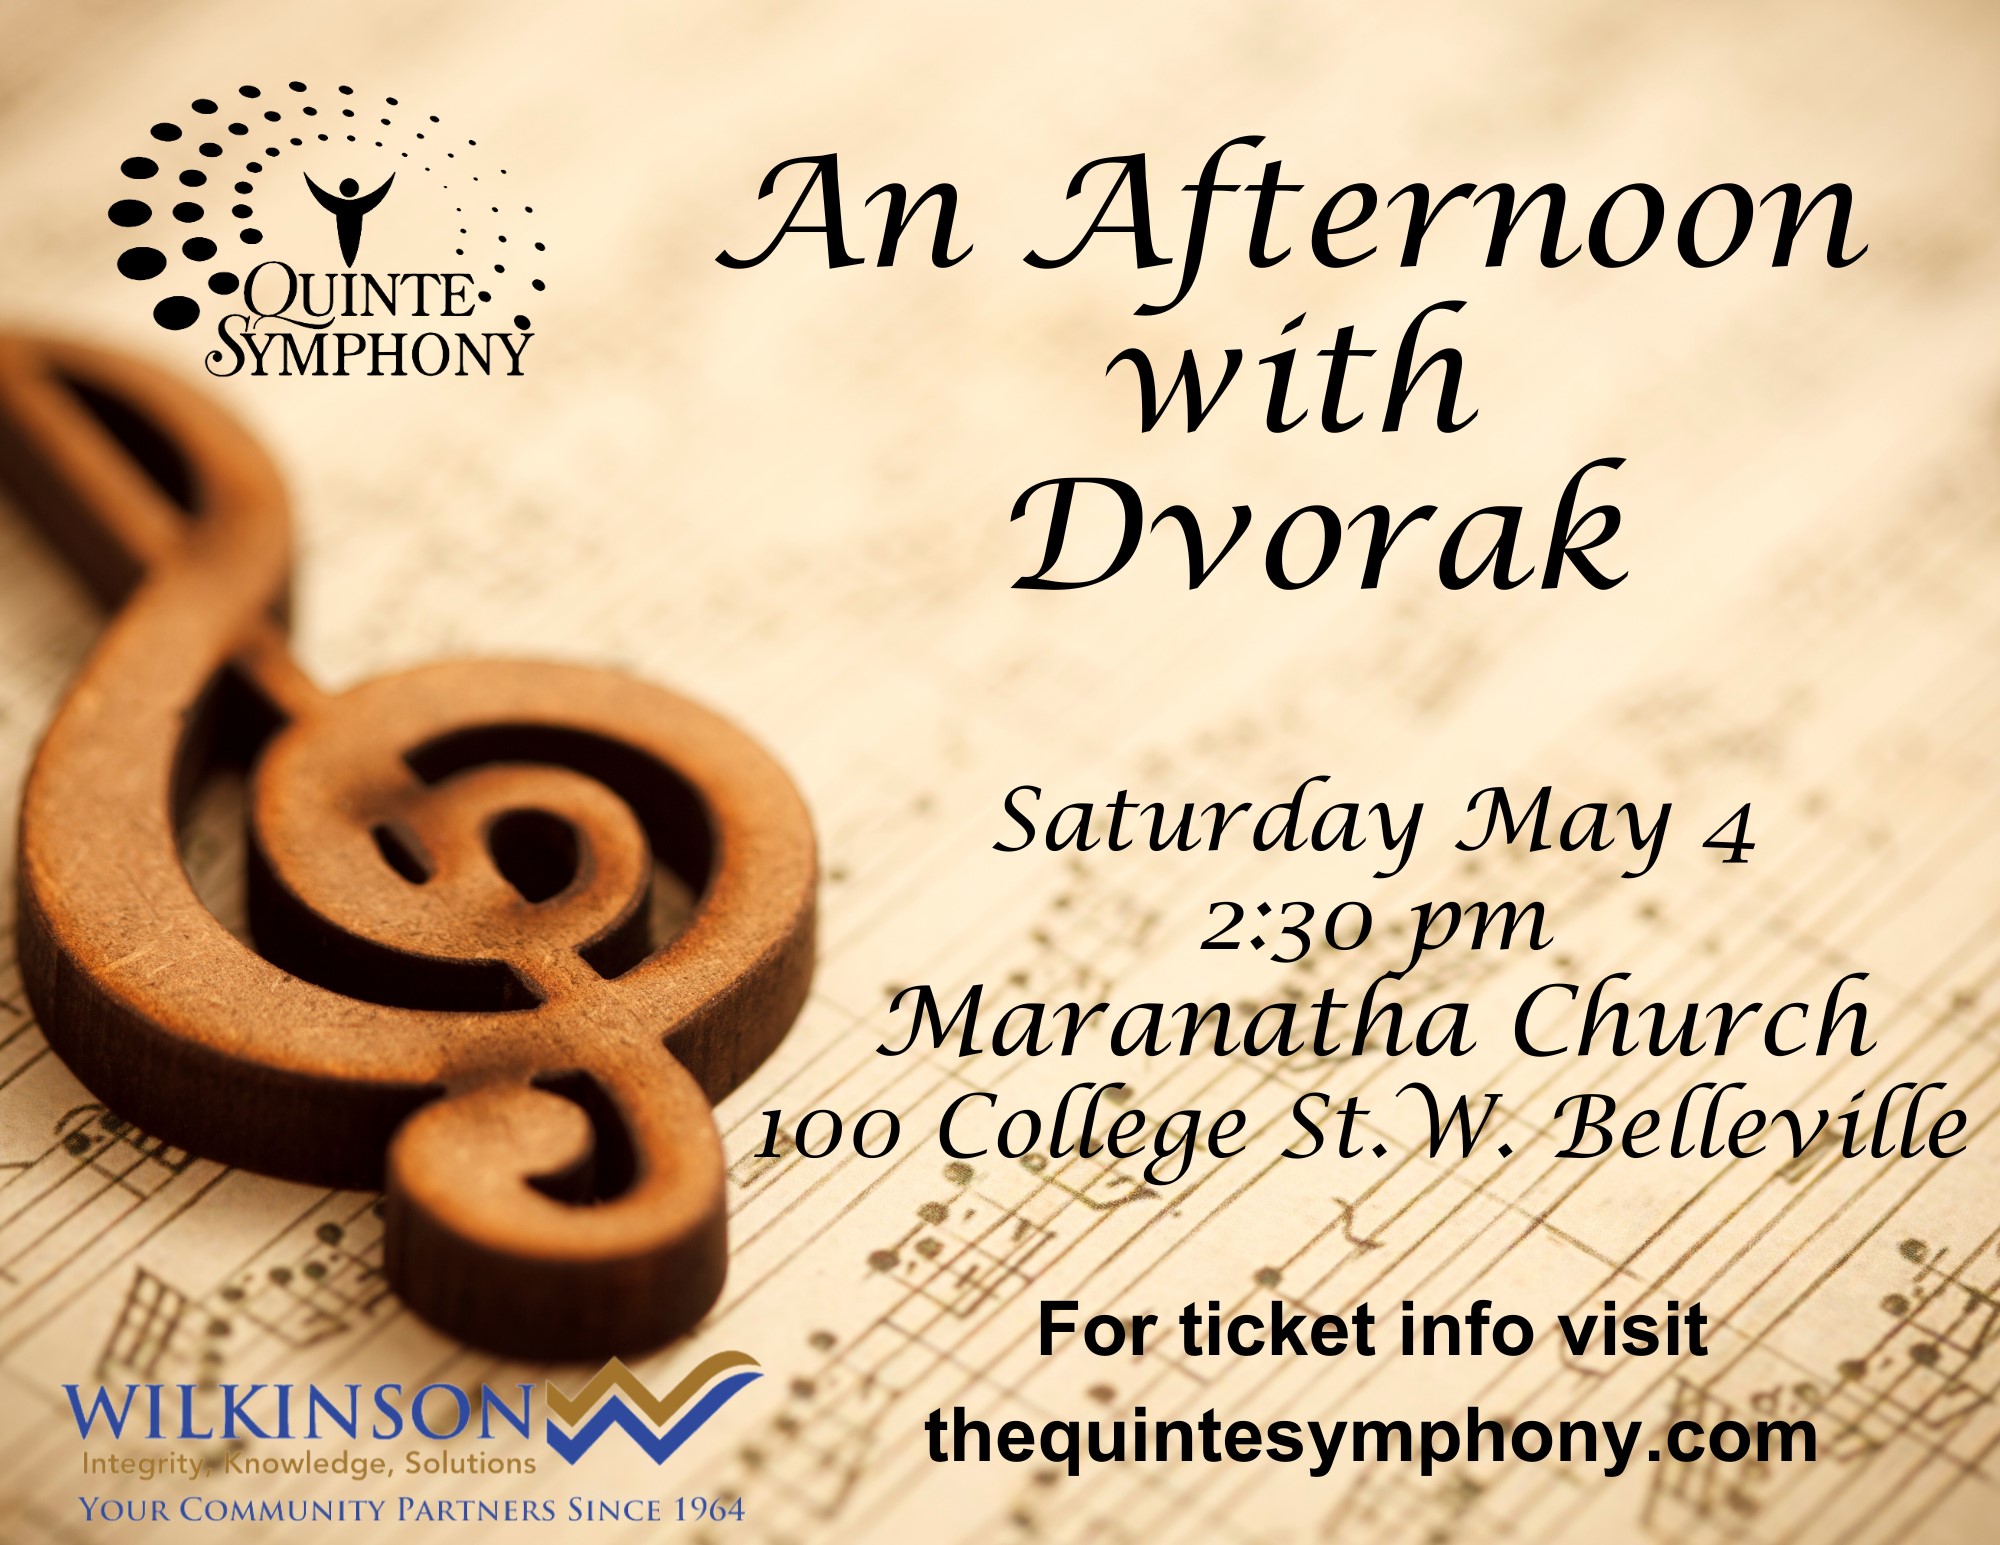 Poster titled "An Afternoon with Dvorak" with a carving of a treble clef.